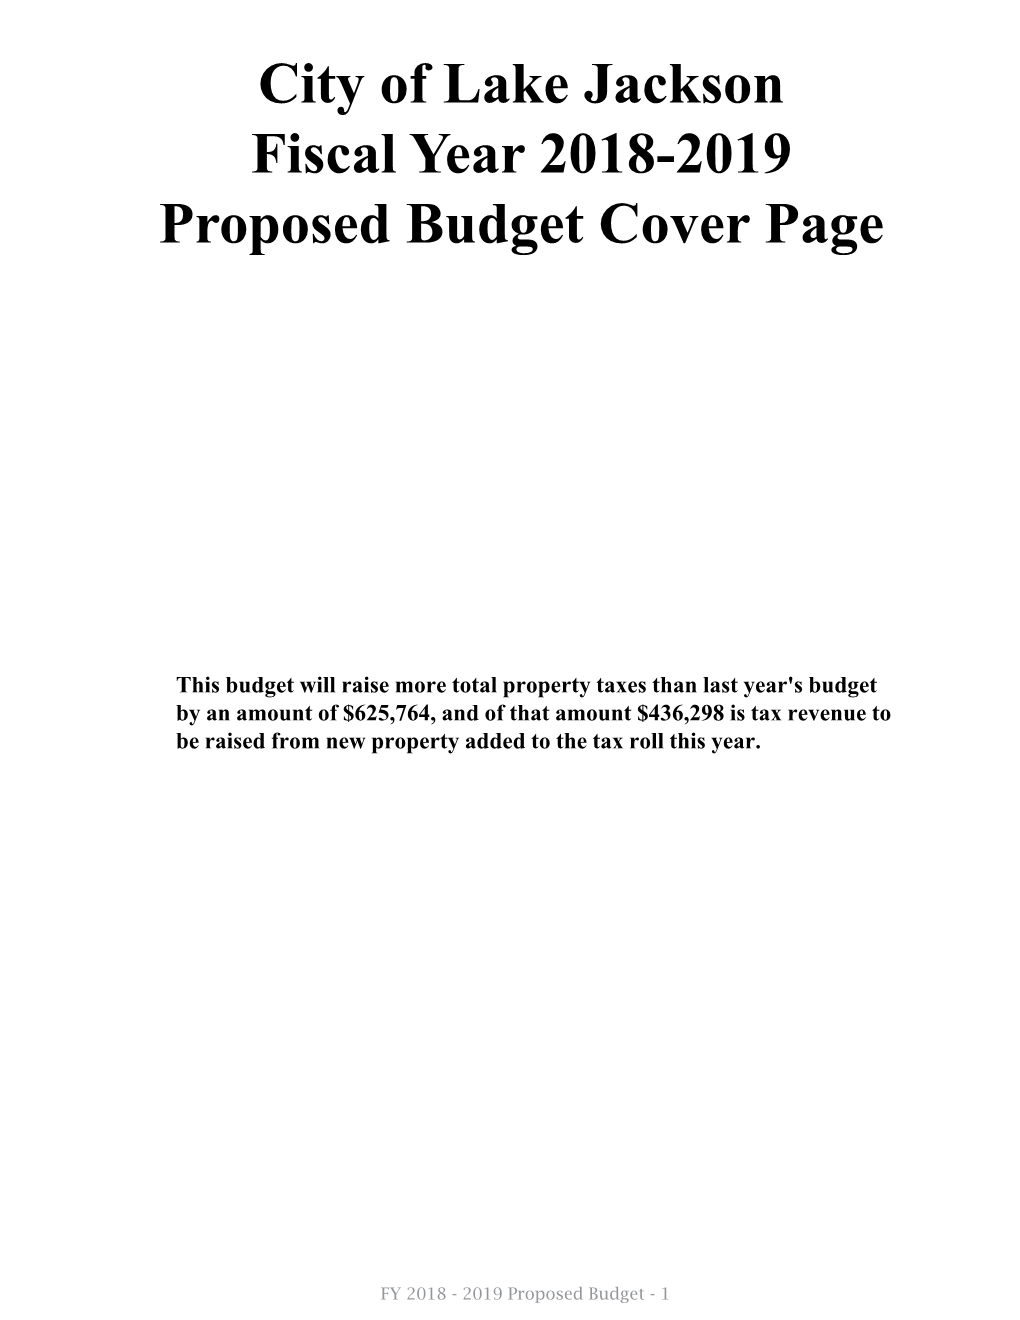 City of Lake Jackson Fiscal Year 2018-2019 Proposed Budget Cover Page